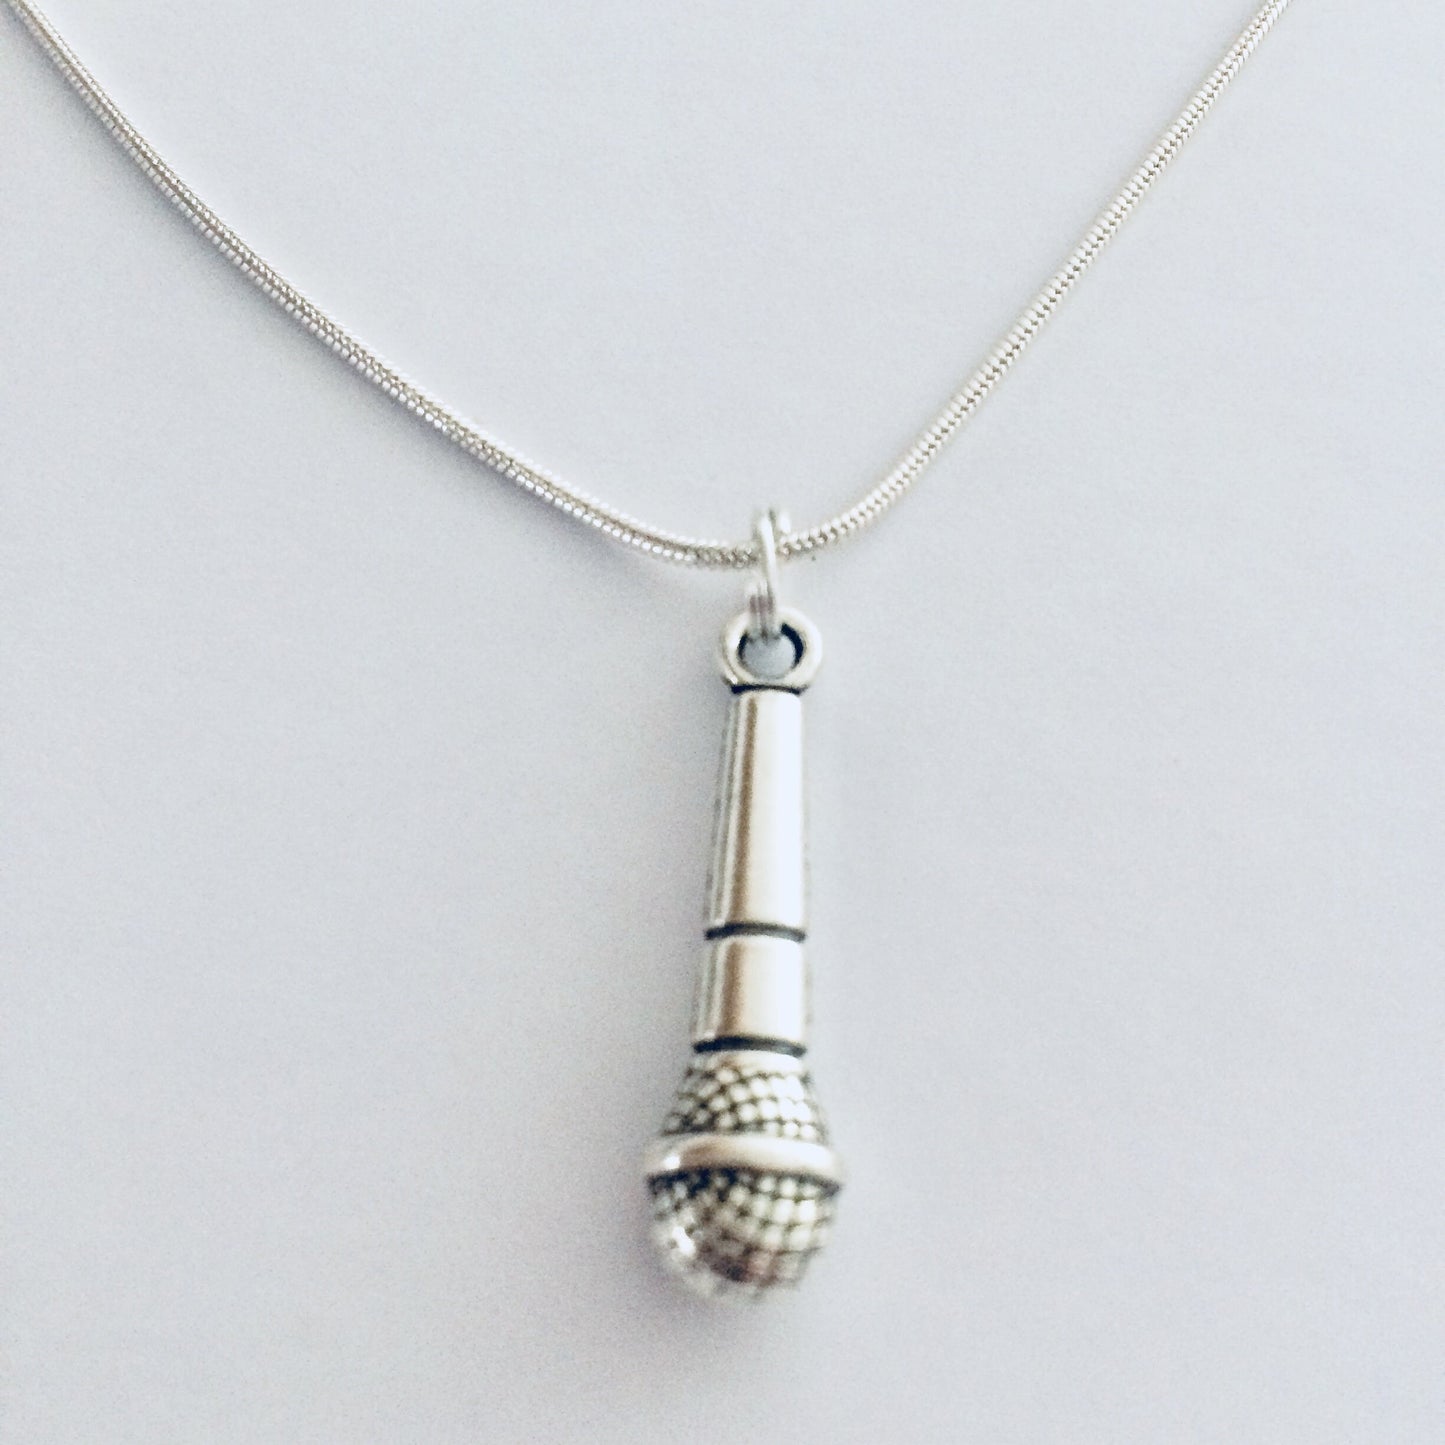 Microphone Necklace, Singer Necklace, Band Jewelry, Singer Jewellery, Gift For Singer, Musician Necklace, Karaoke Lover Gift, Band Gift.